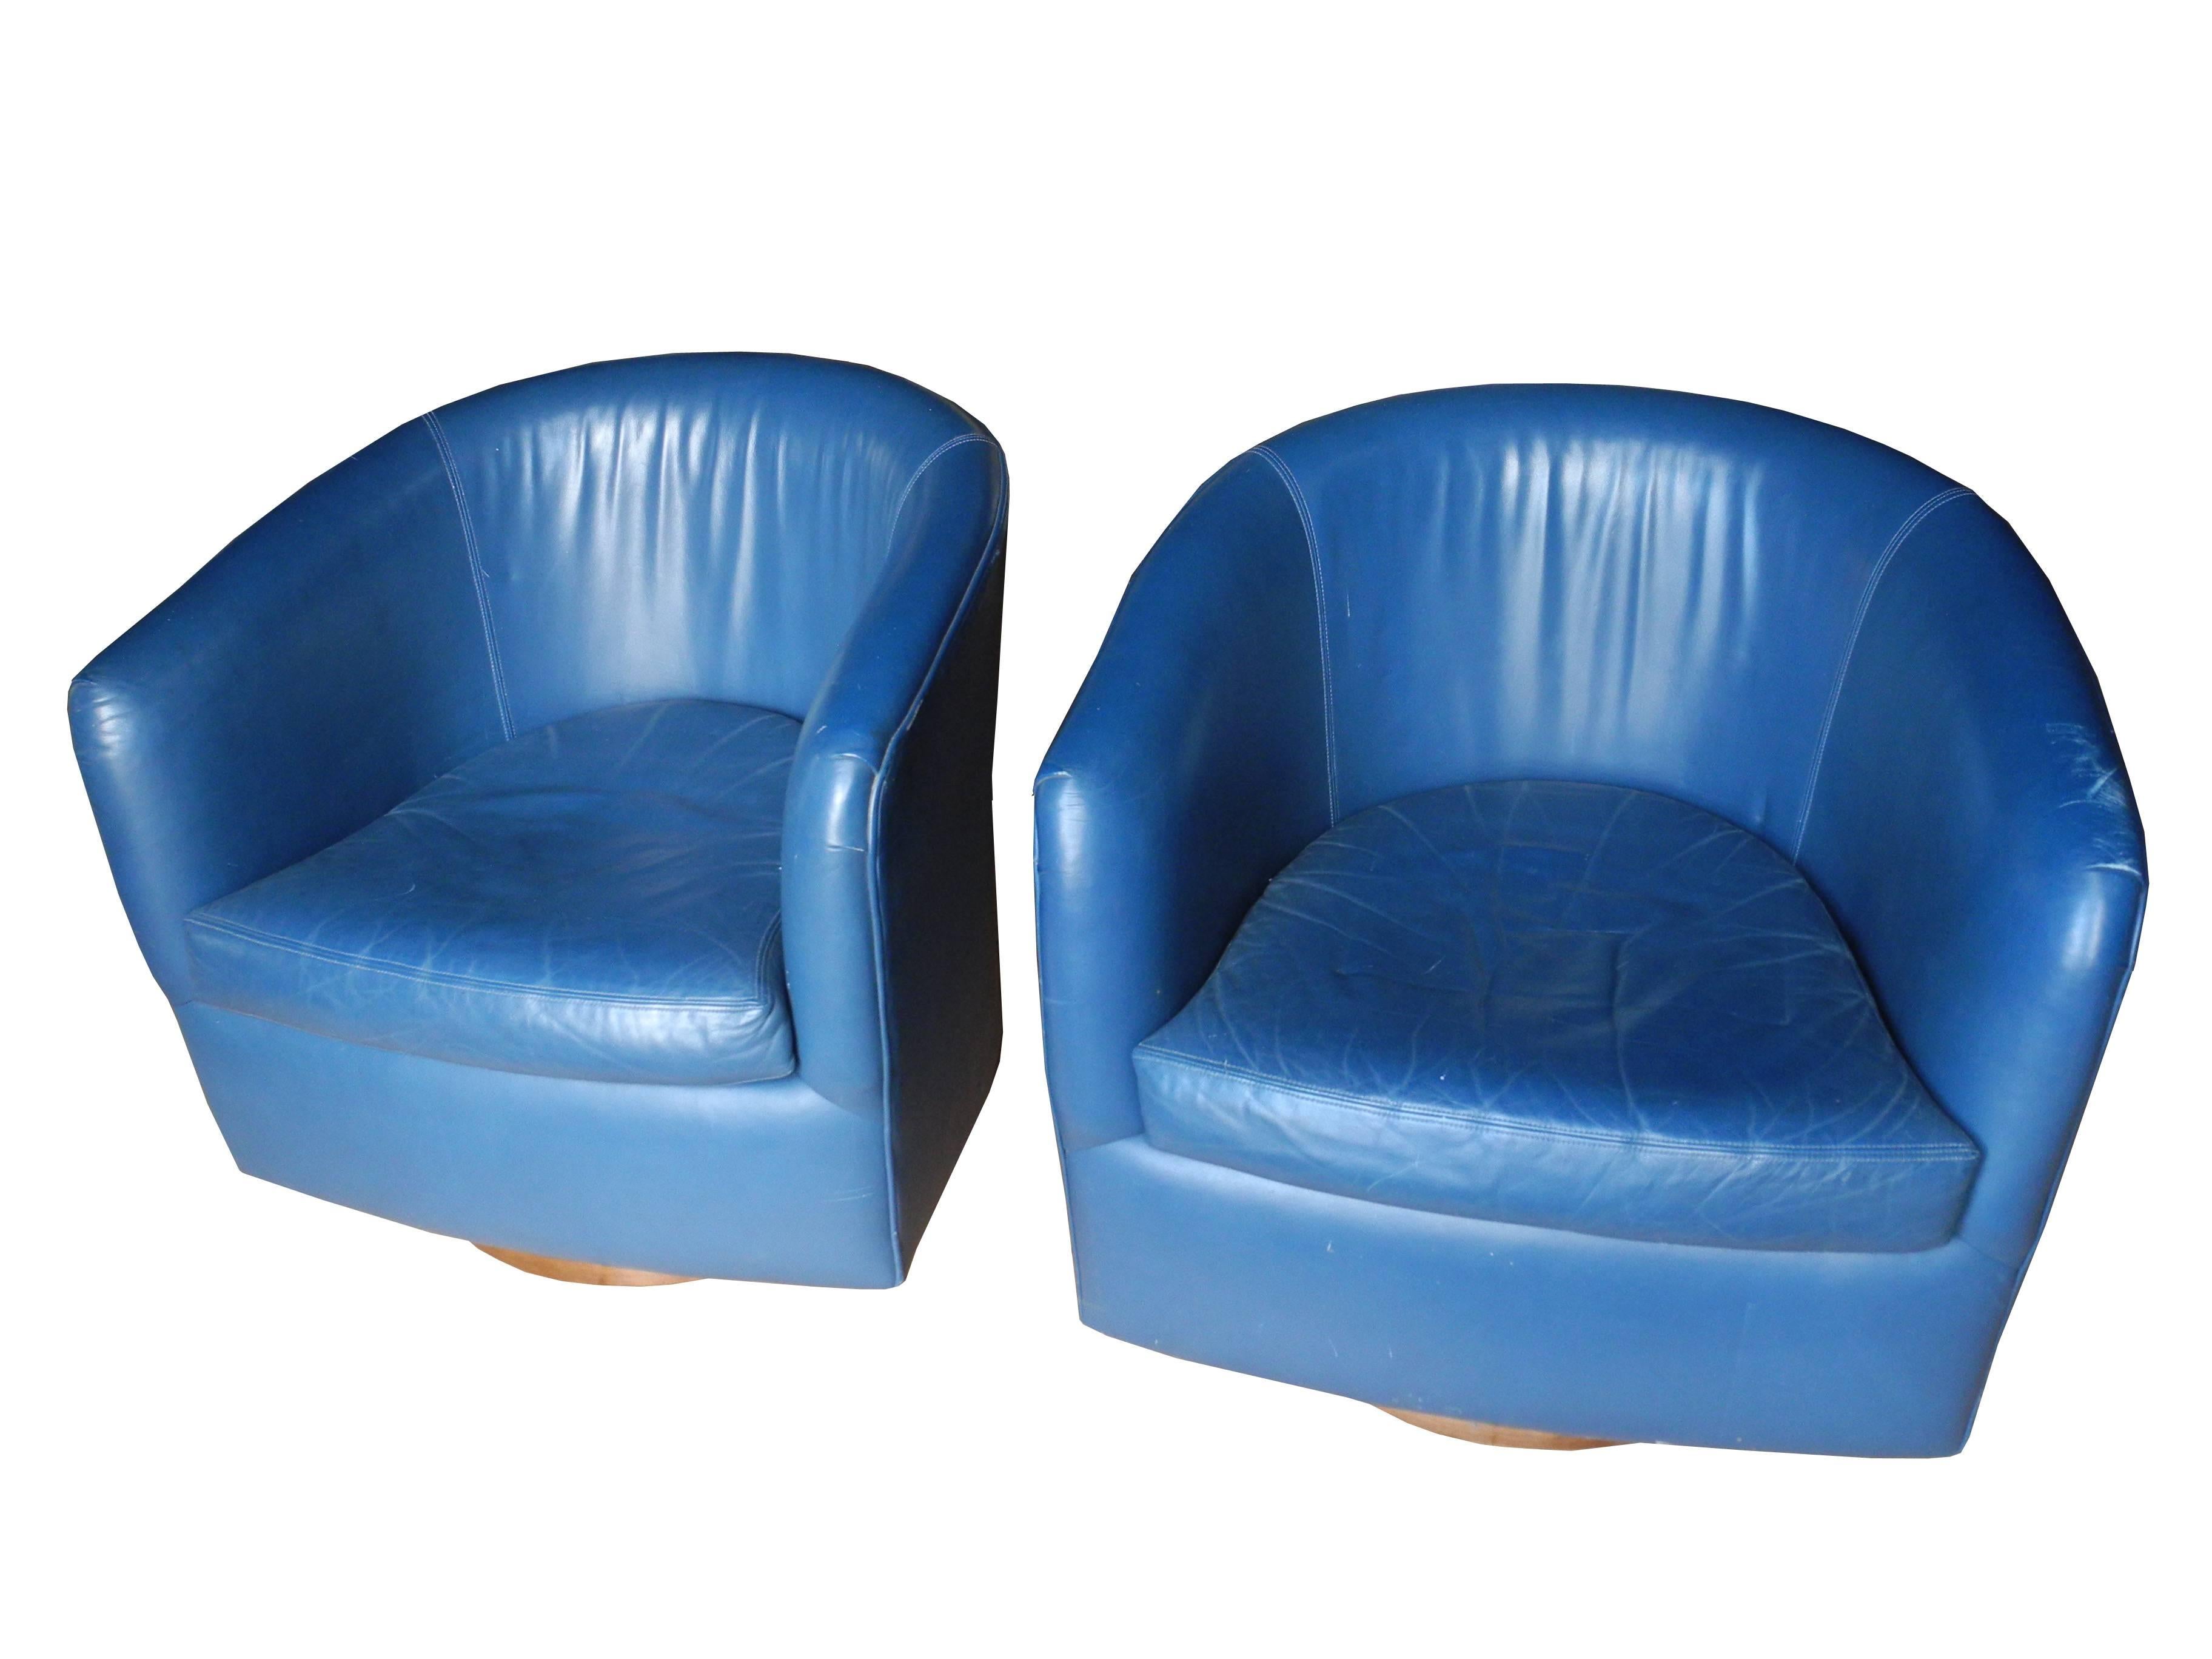 American Pair of Mid-Century Modern Blue Leather Swivel Lounge Chairs by Milo Baughman